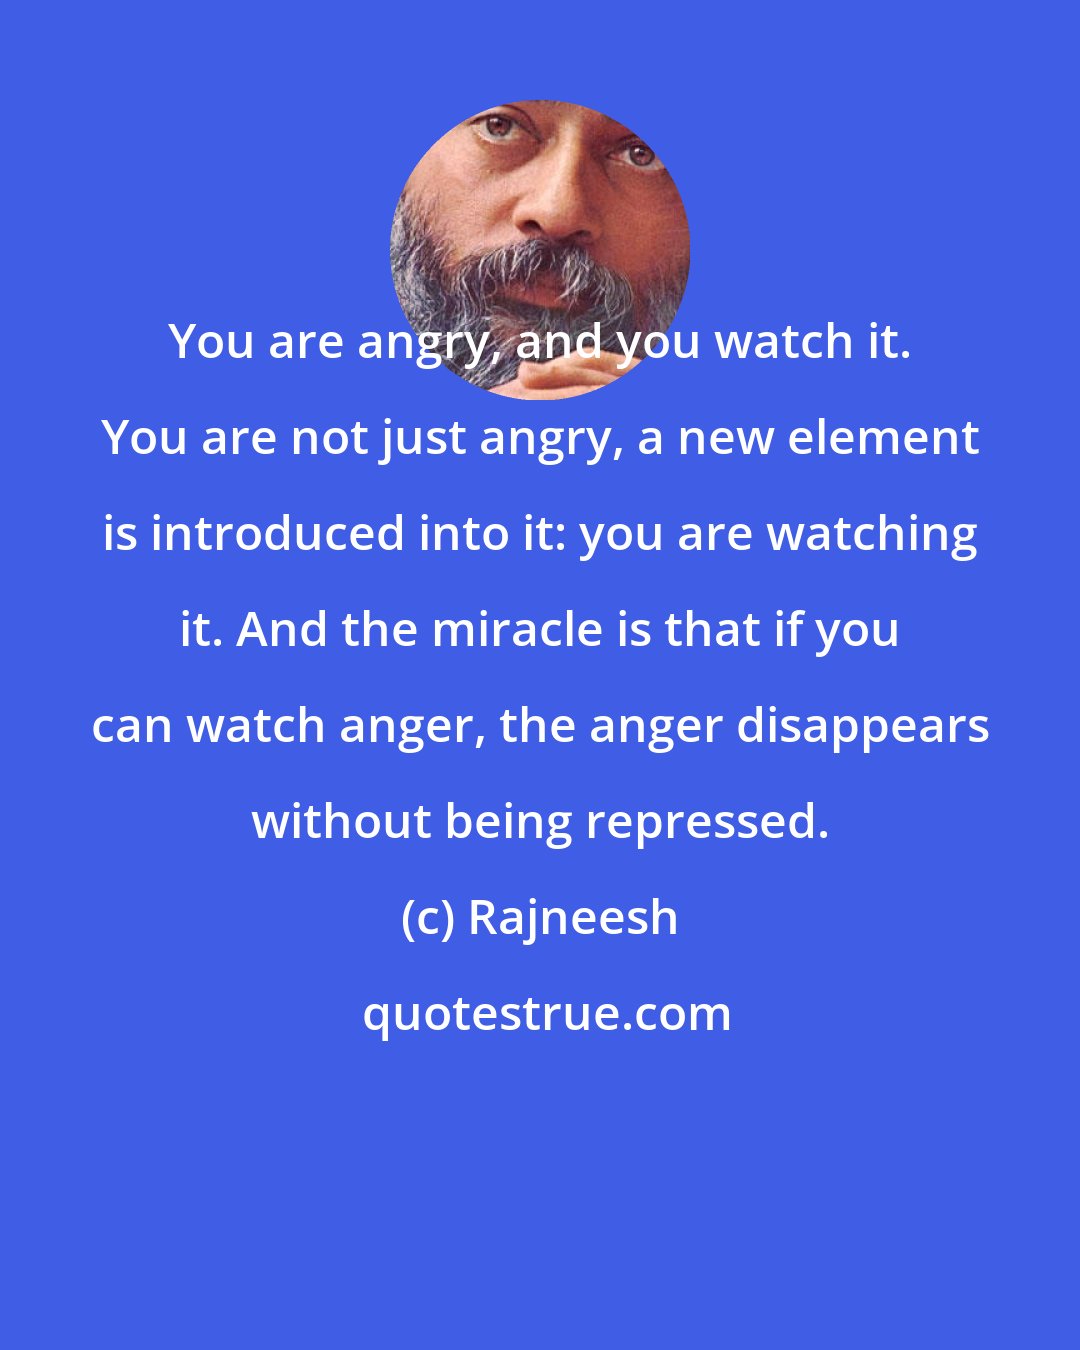 Rajneesh: You are angry, and you watch it. You are not just angry, a new element is introduced into it: you are watching it. And the miracle is that if you can watch anger, the anger disappears without being repressed.